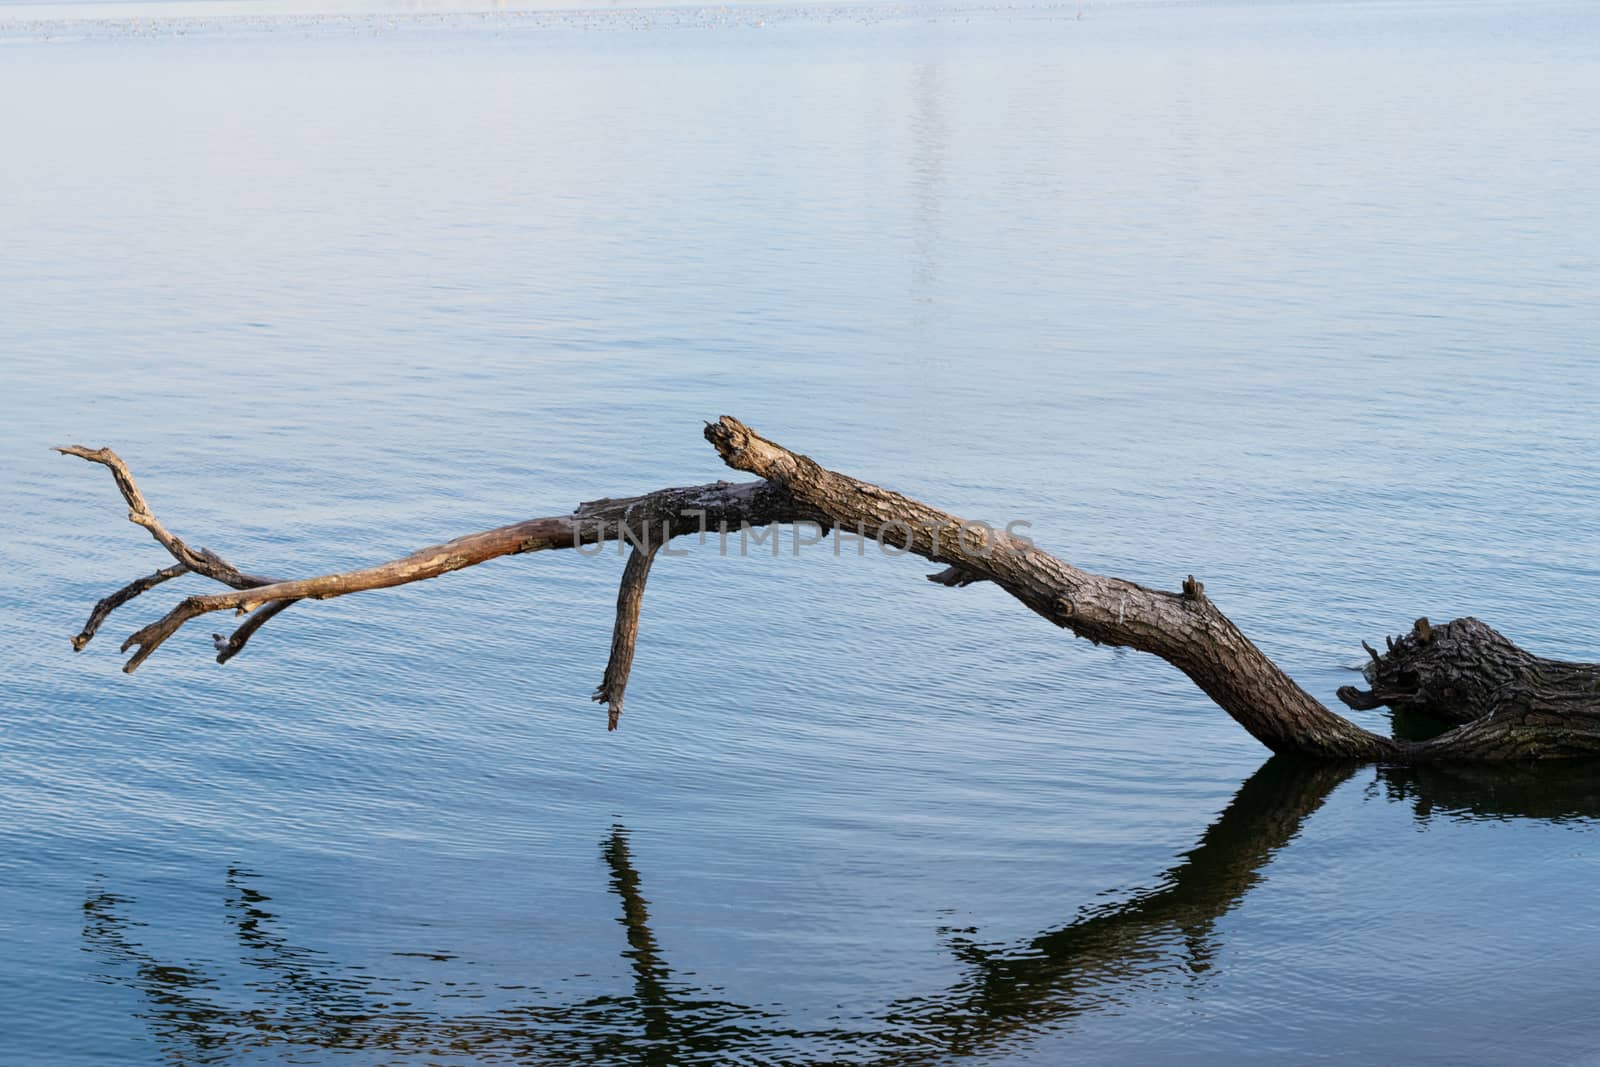 A big fallen tree branch standing above the the water of a lake, Morii Lake, Bucharest, Romania by Luca-Mih